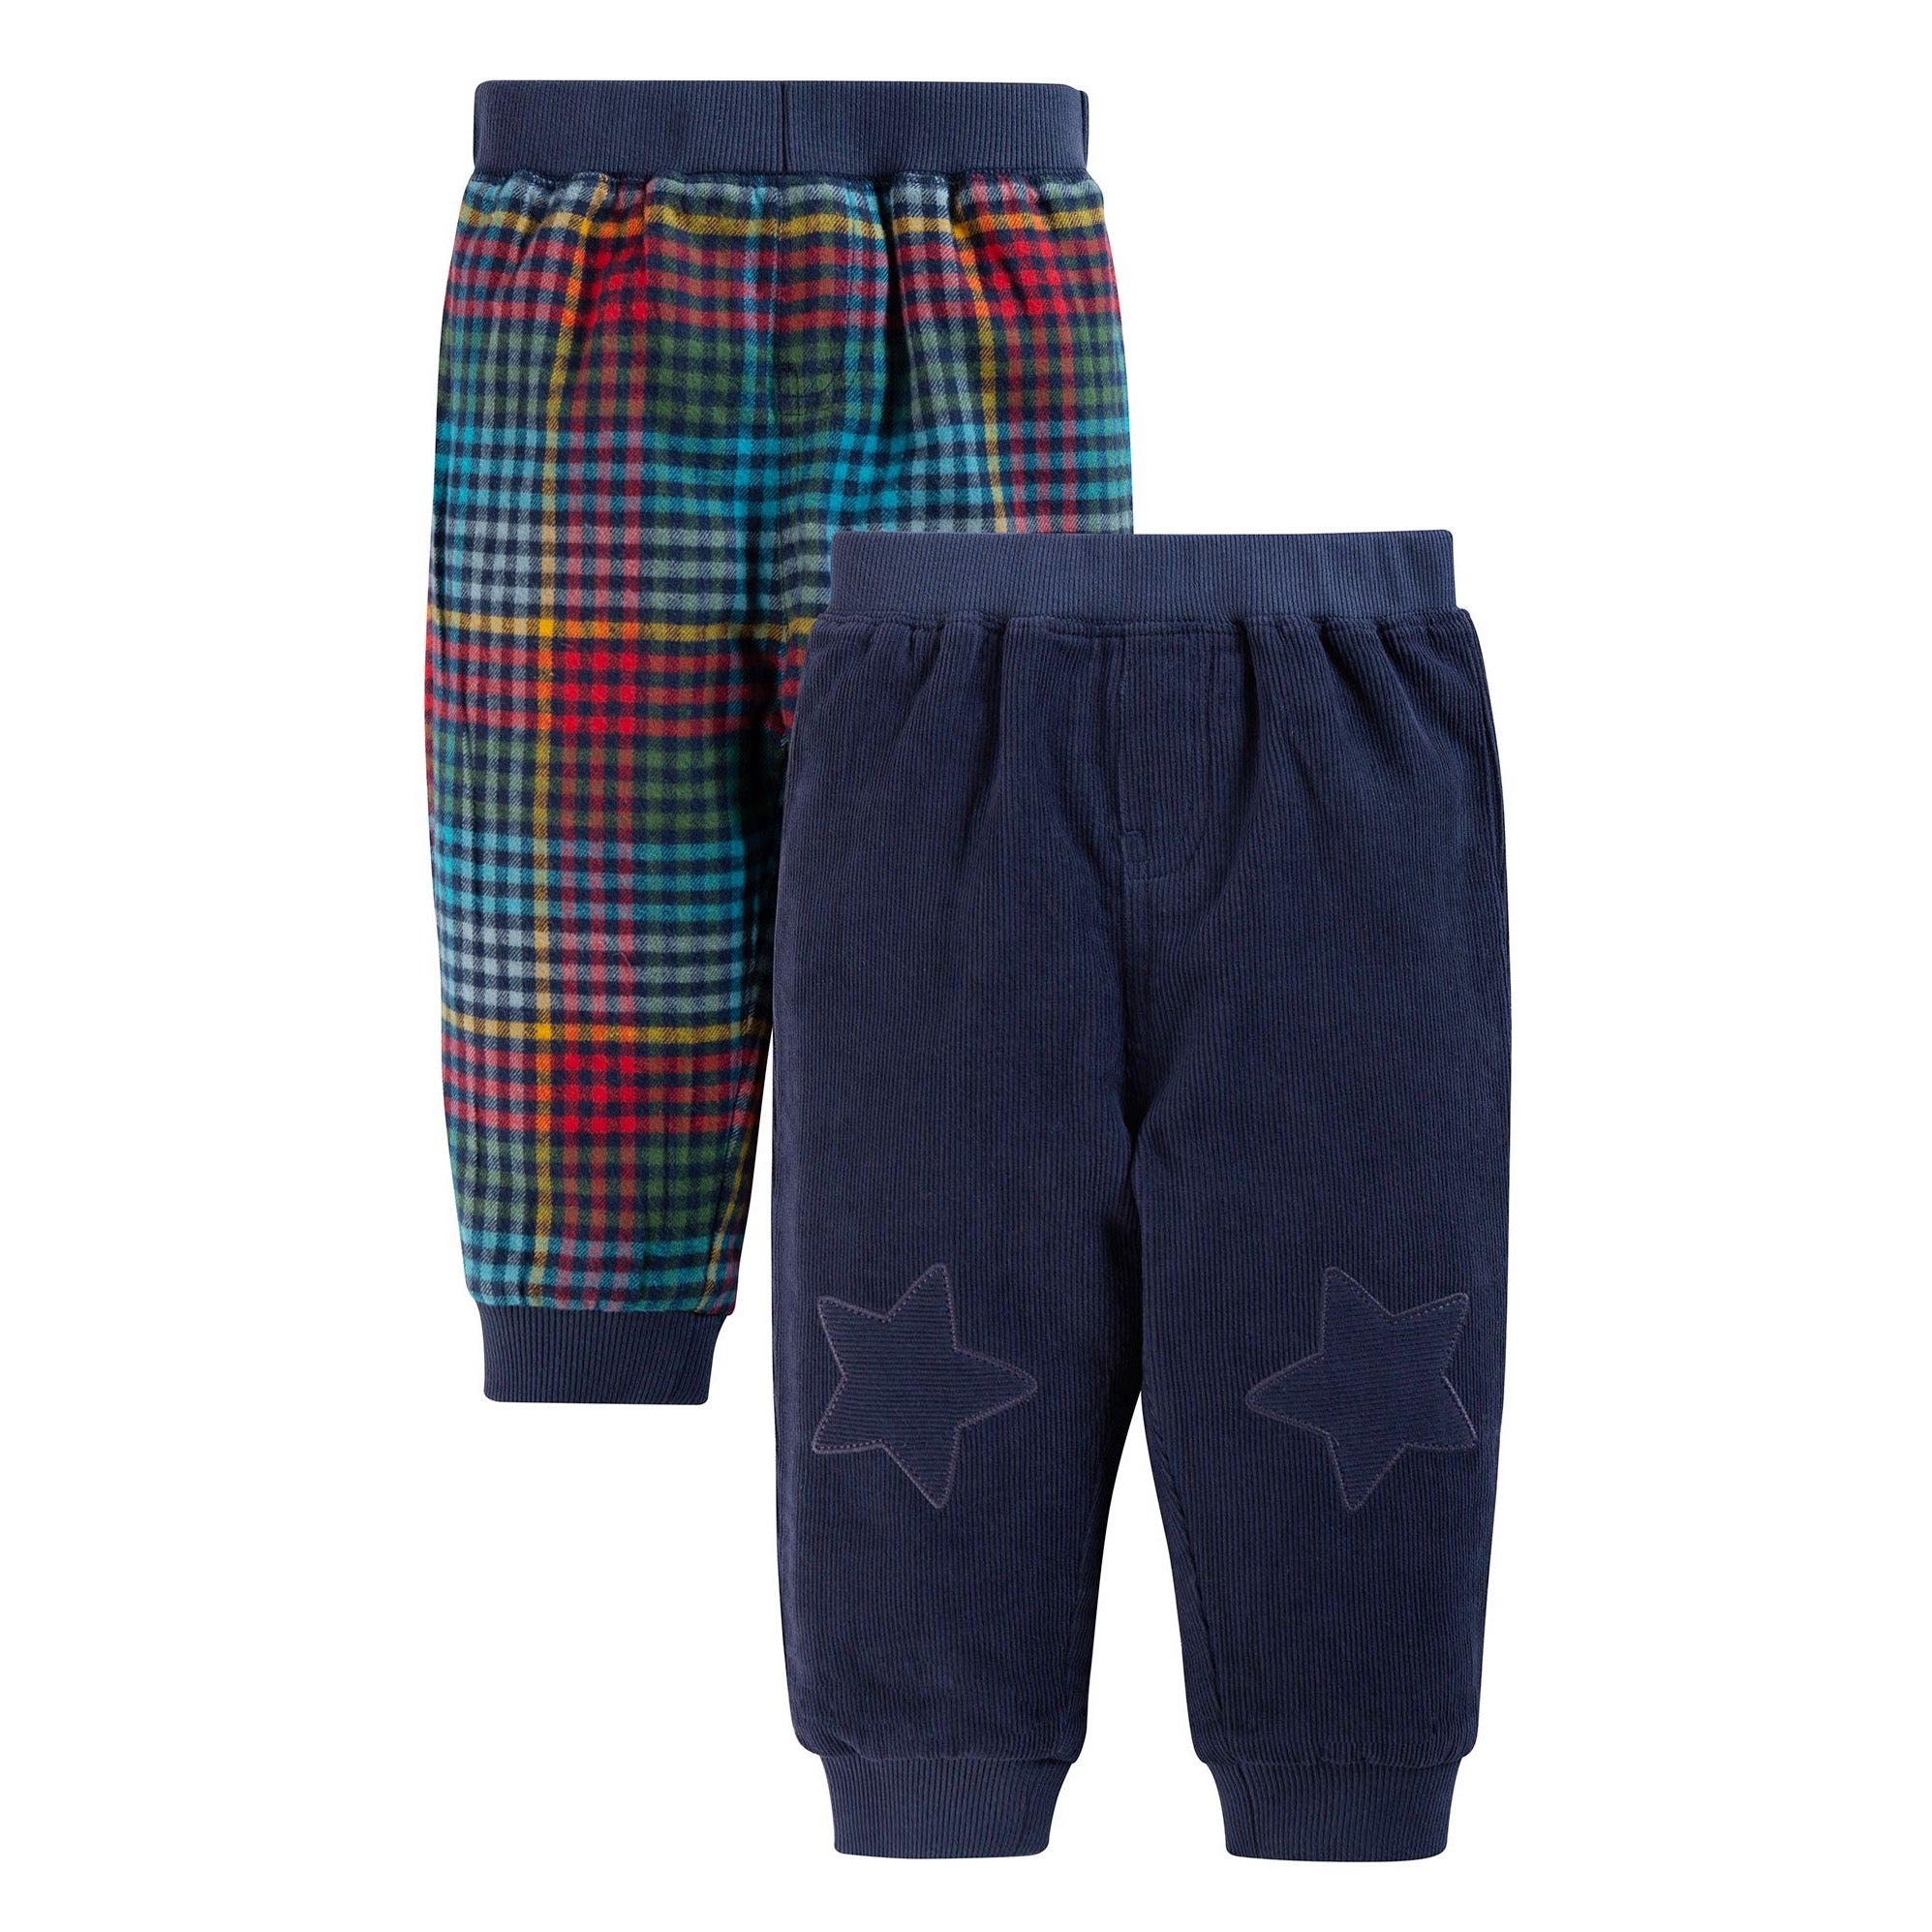 Frugi Infant Cassius Reversible Cord Trousers Clothing 3-6M / Indigo,6-9M / Indigo,9-12M / Indigo,12-18M / Indigo,18-24M / Indigo,2-3YRS / Indigo,3-4YRS / Indigo